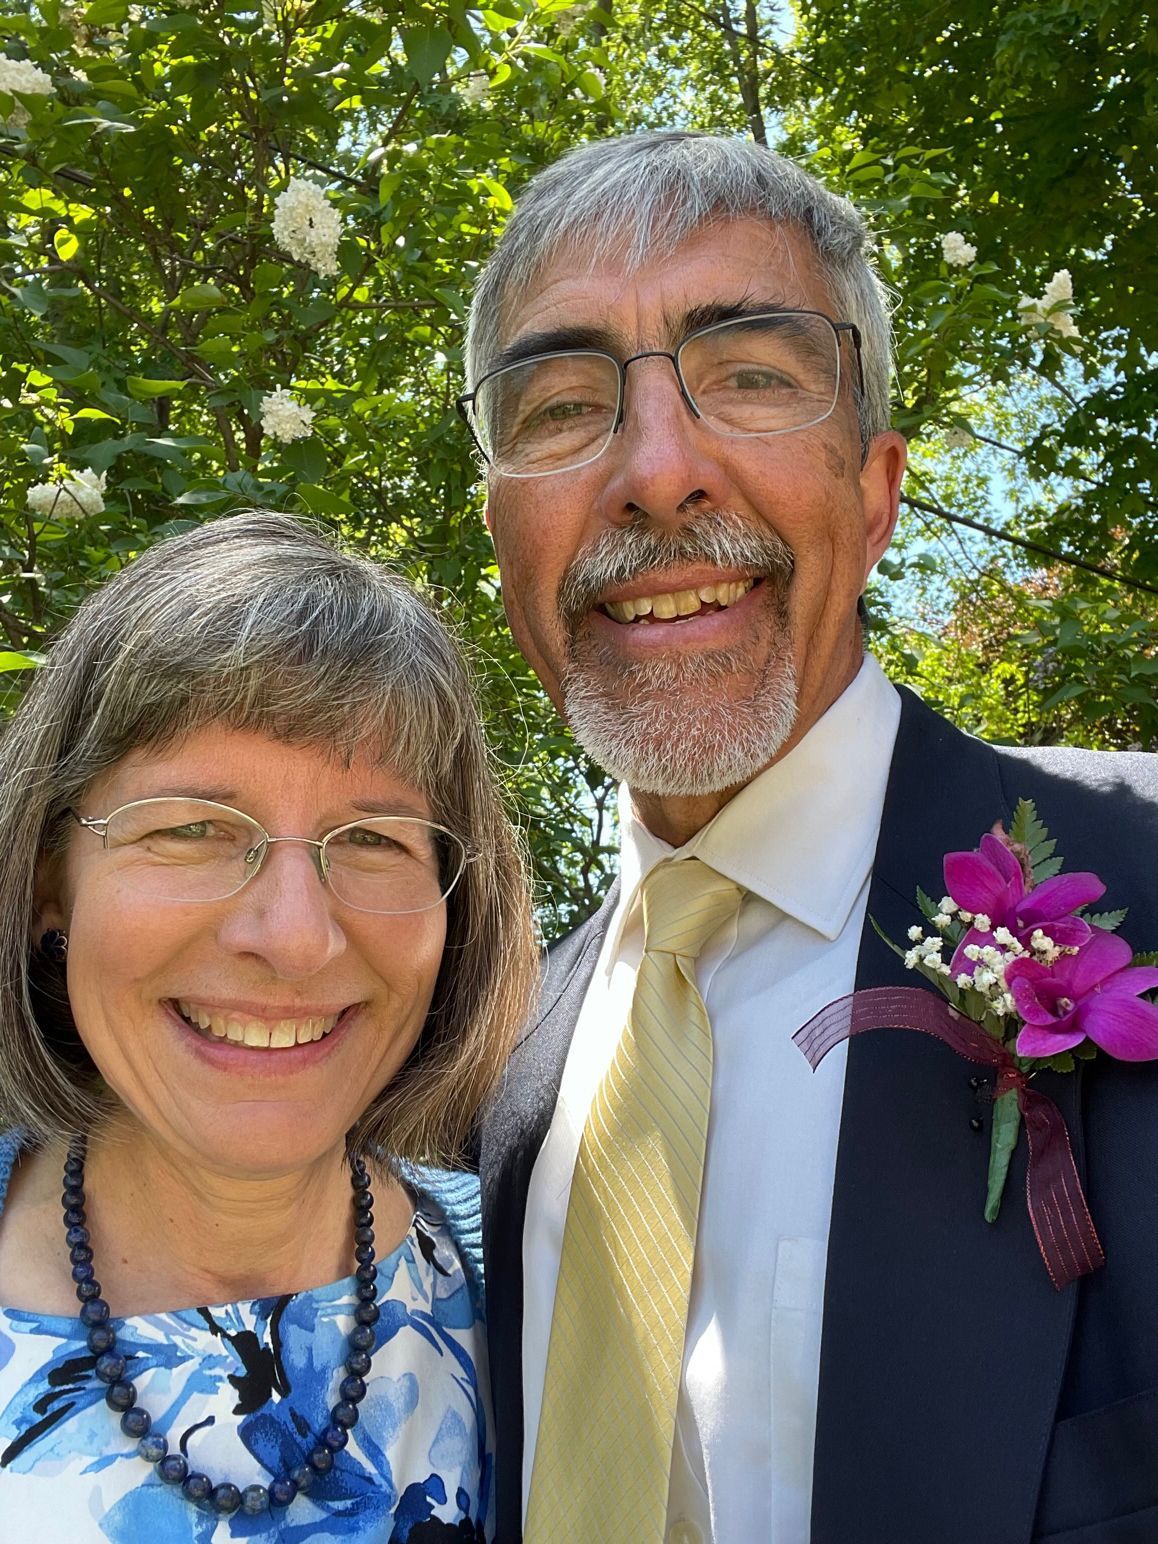 Pete Sehloff, with a purple flower on his suit lapel, with his wife, Sarah. They are outside with blossoming trees in the background